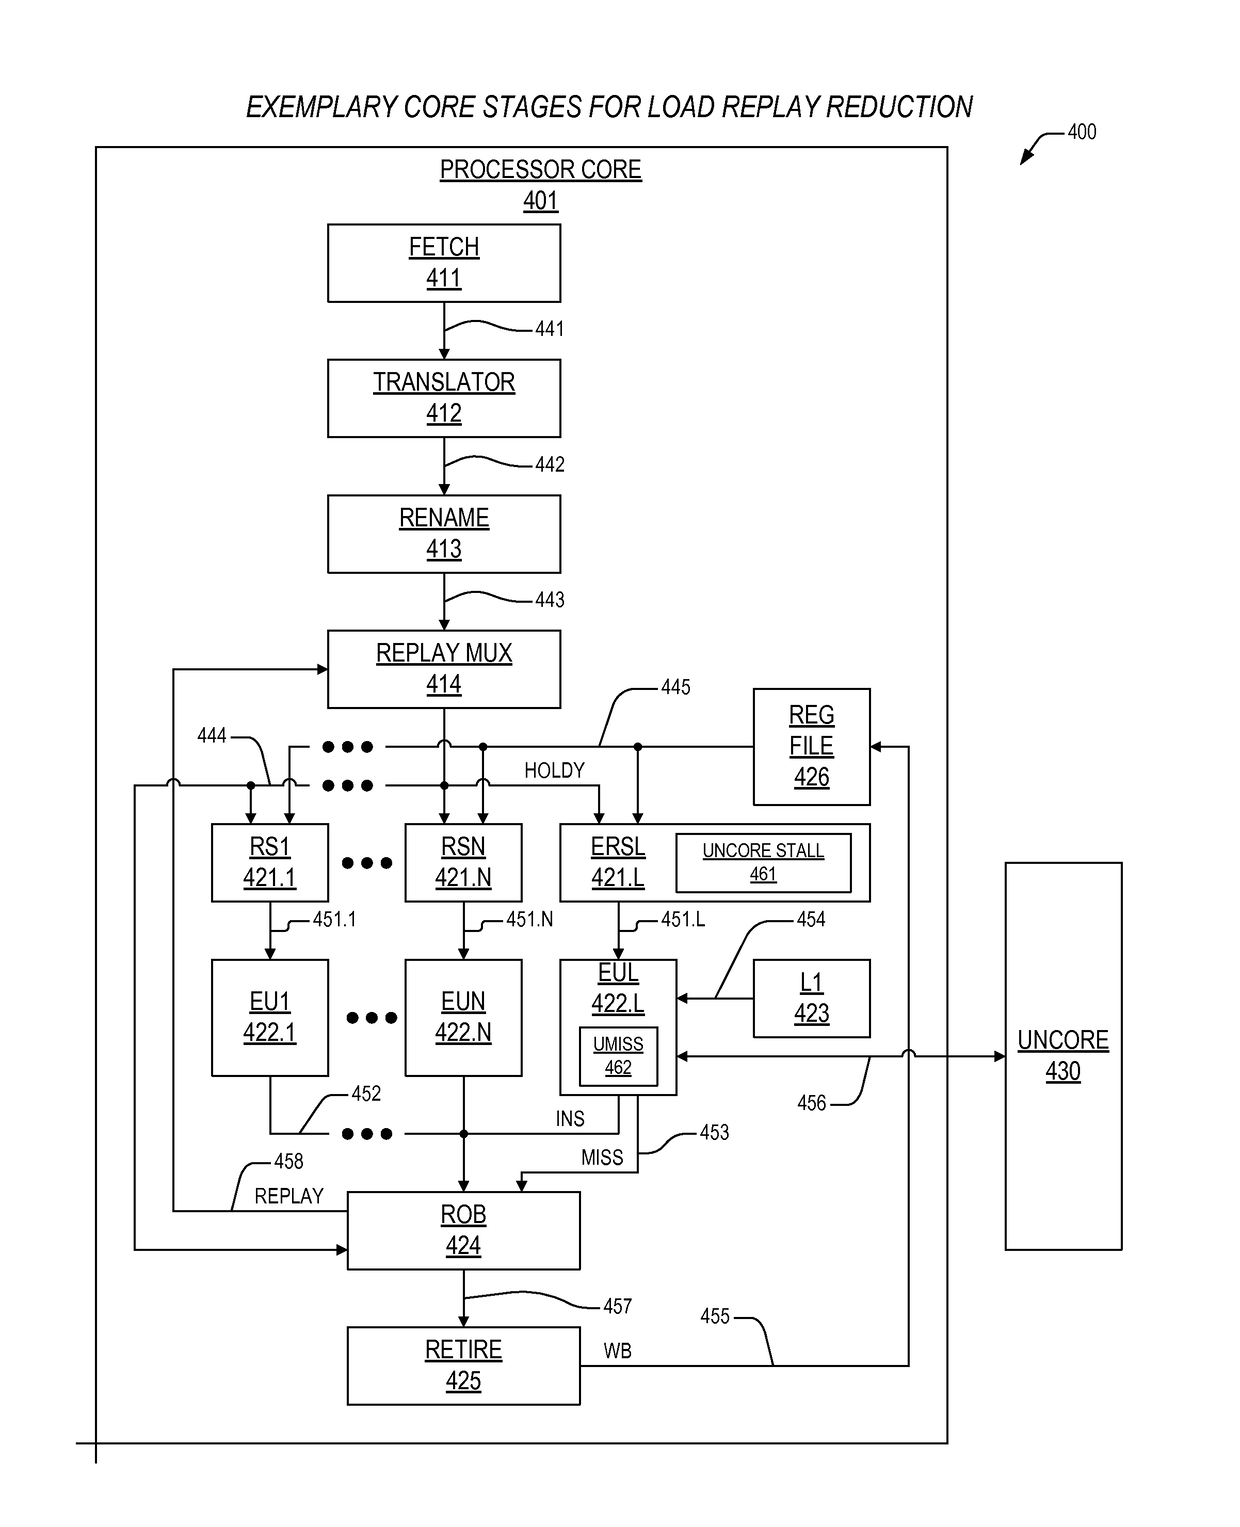 Mechanism to preclude load replays dependent on long load cycles in an out-of-order processor